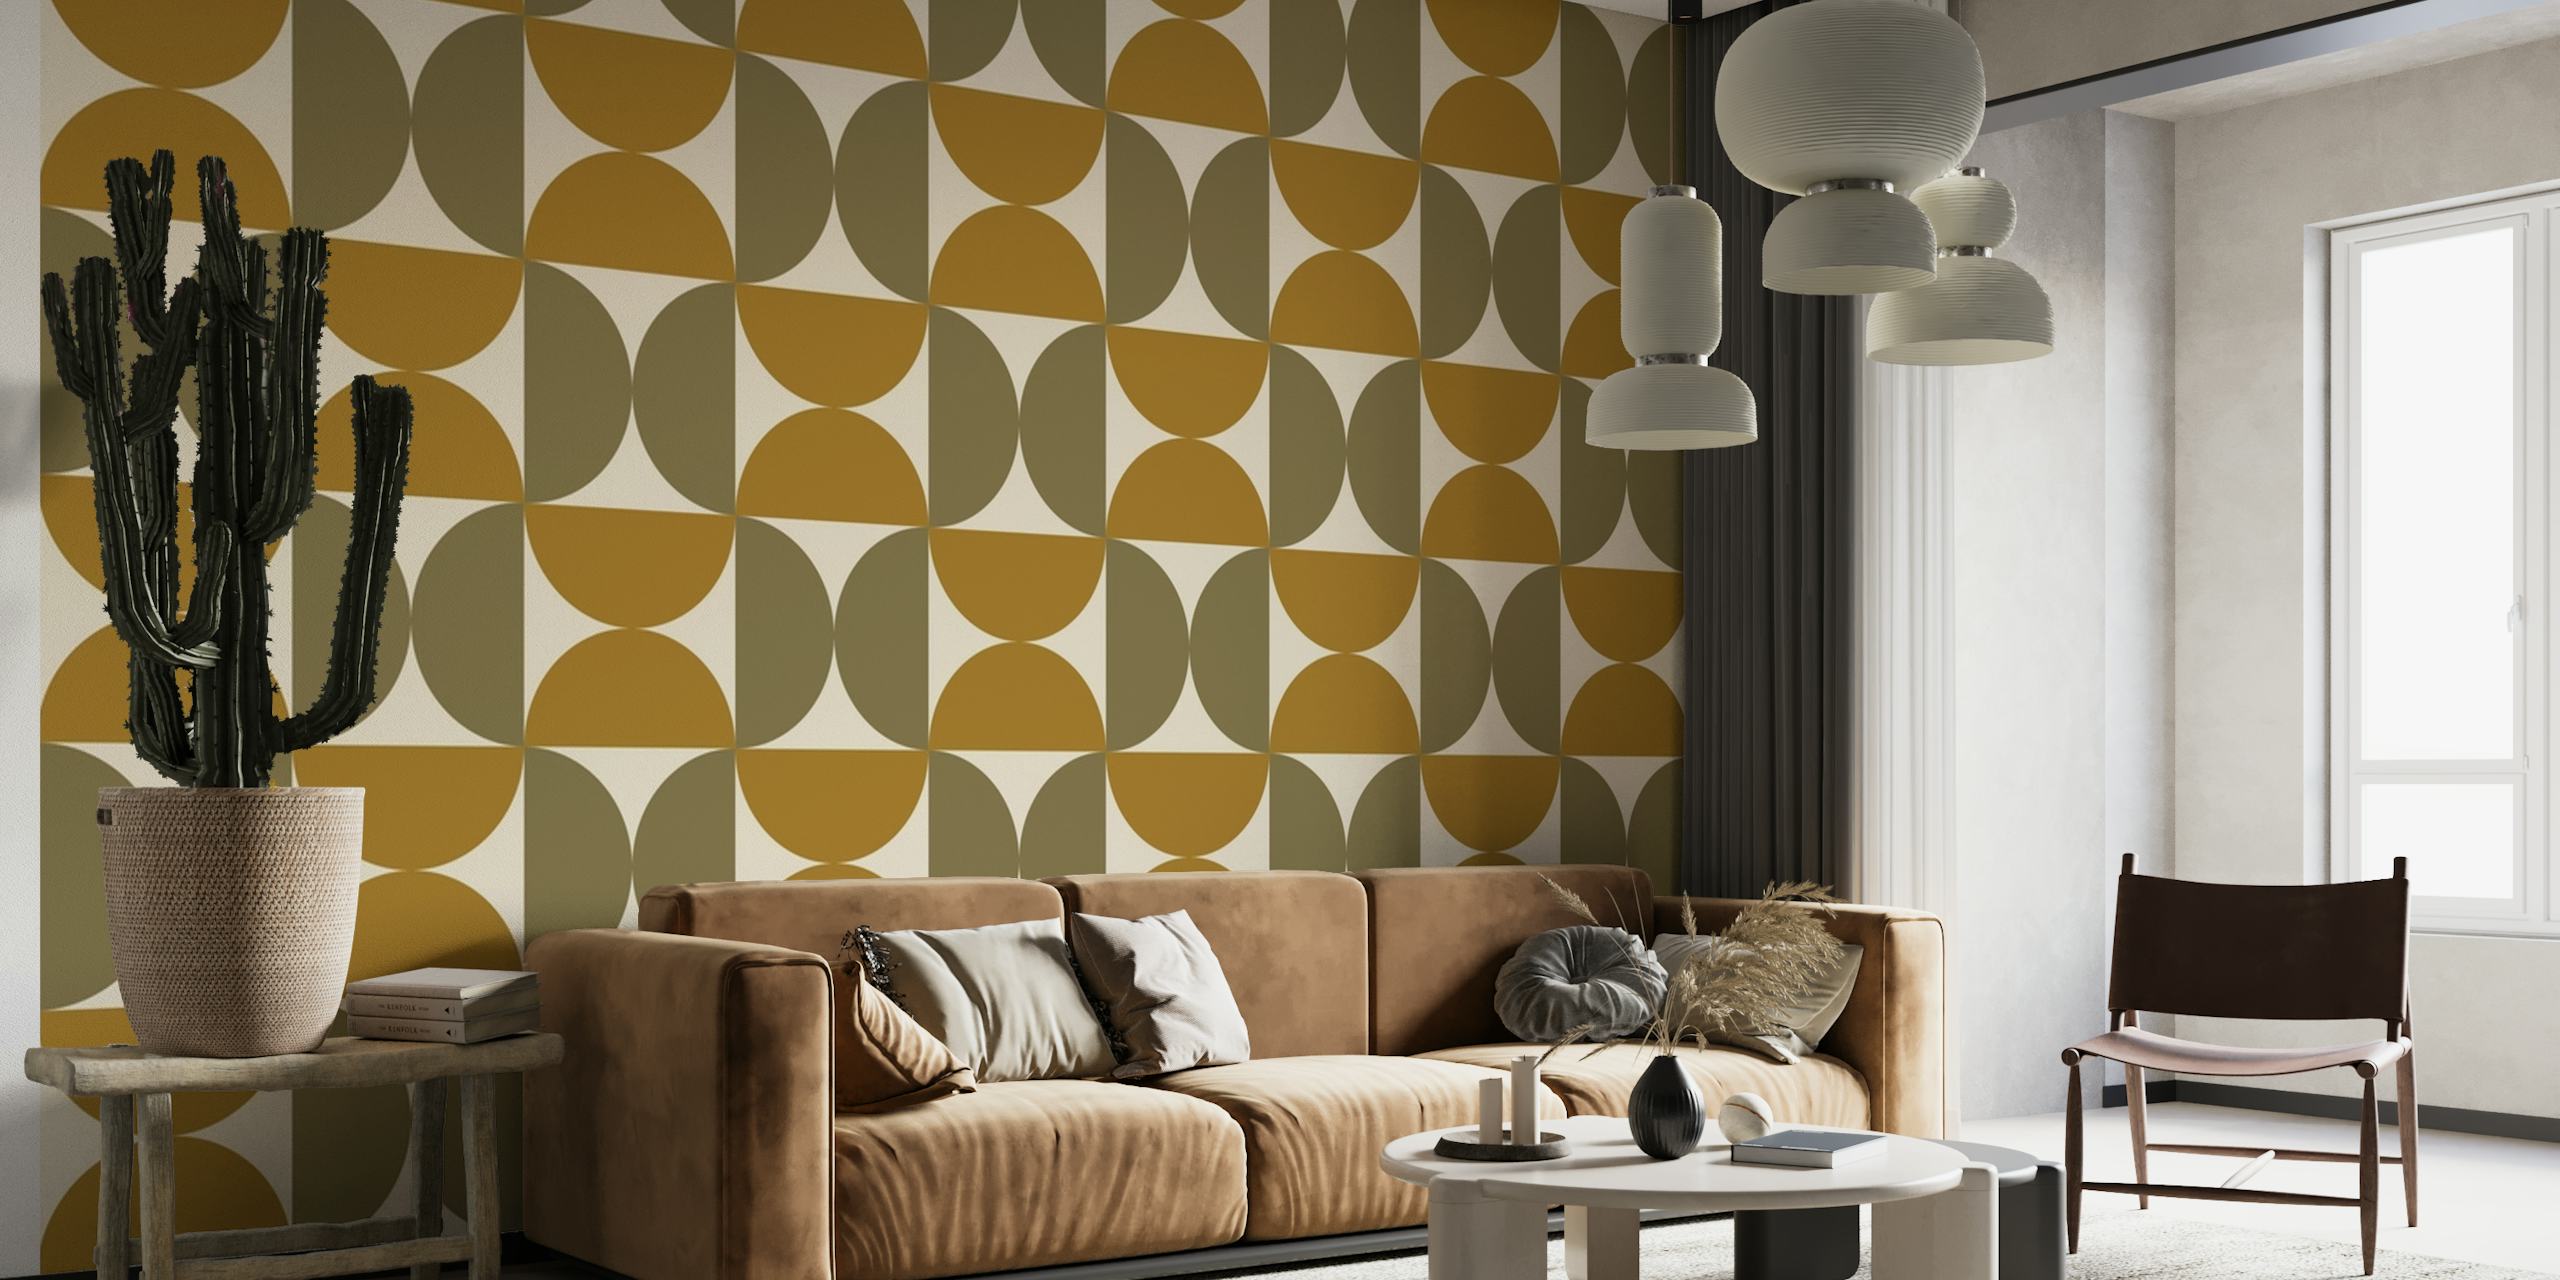 Mid-Century Tiles wall mural featuring geometric patterns and earthy tones